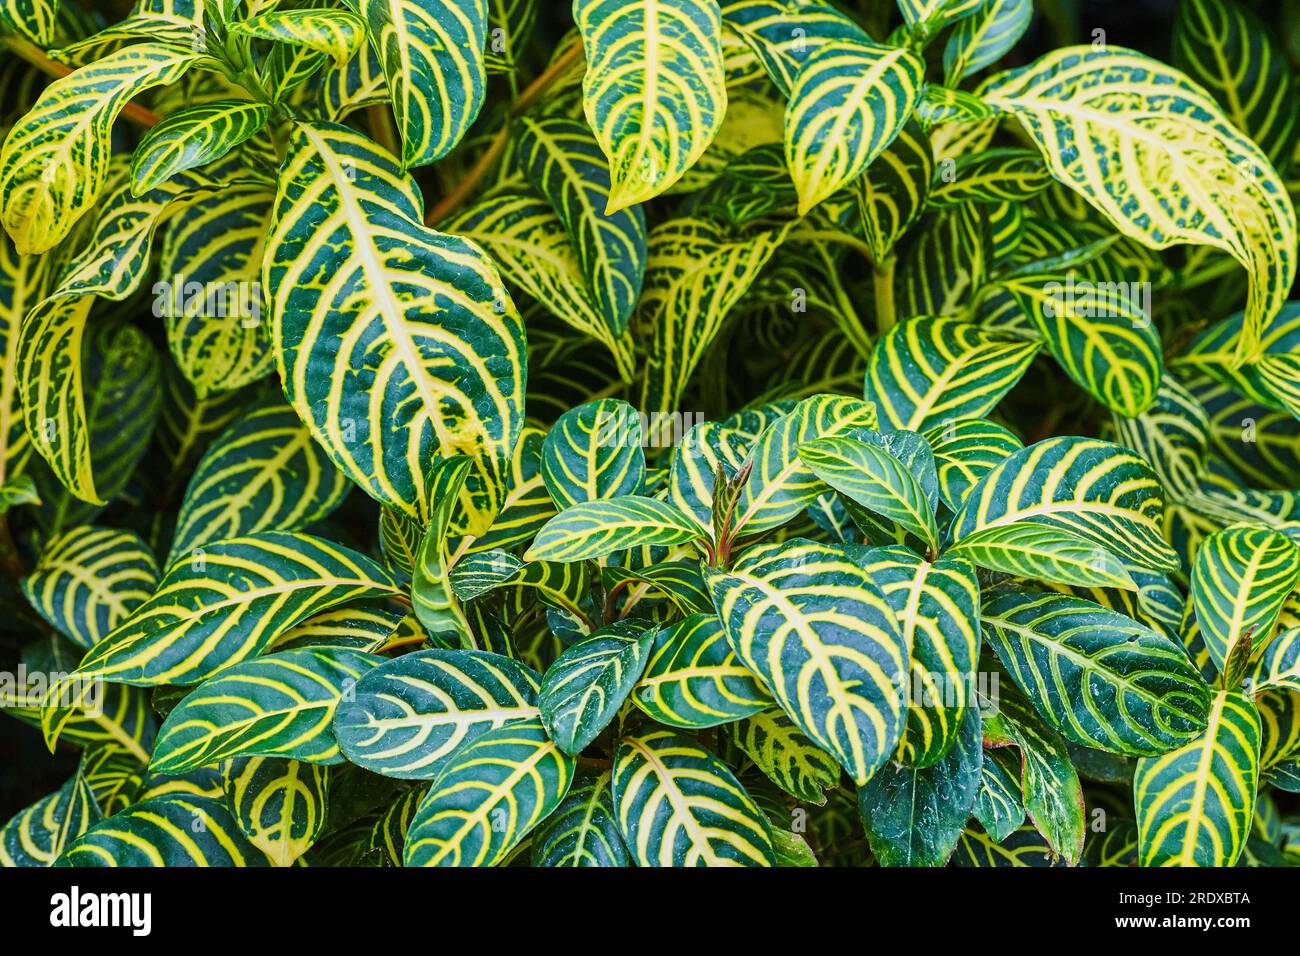 Wall of Coleus foliage leaves background asset Stock Photo